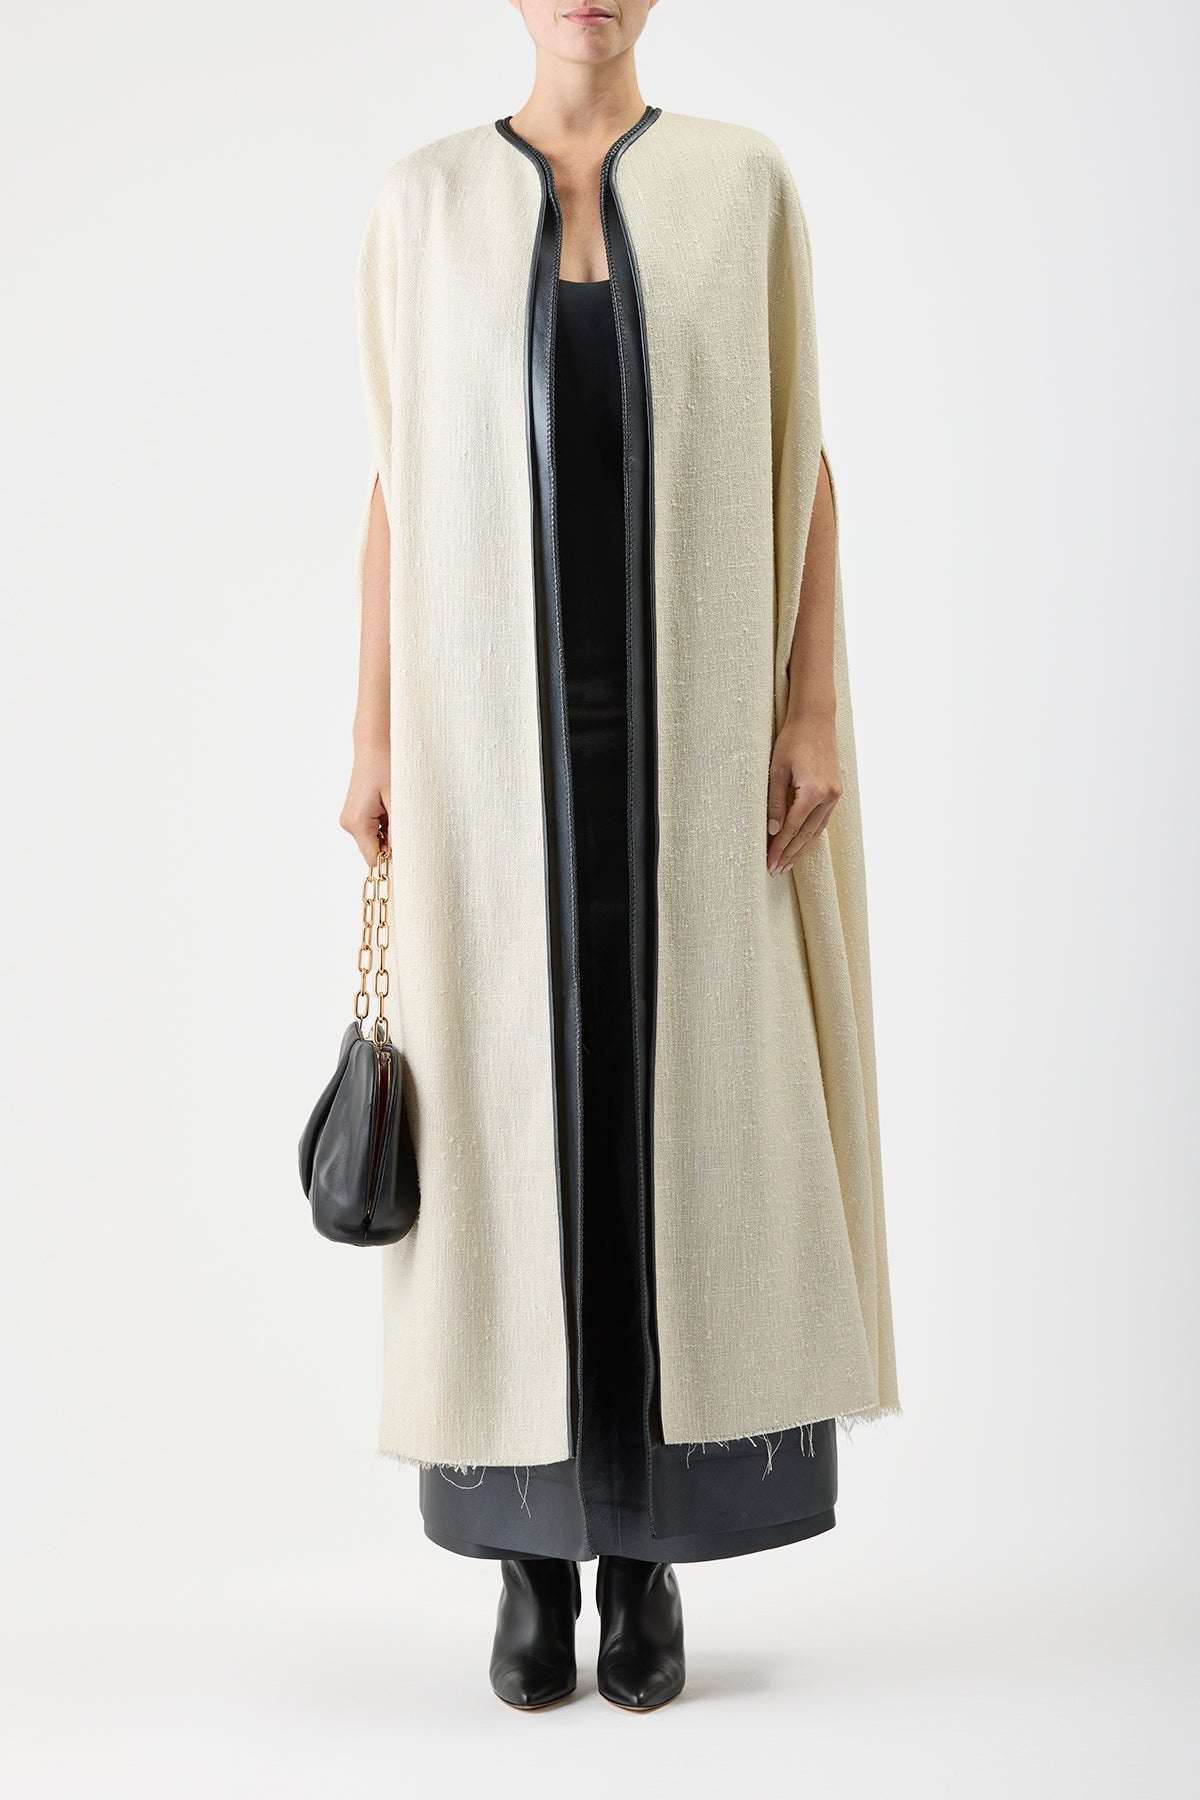 Glenys Cape in Soft Silk Wool with Leather Gilet - 3